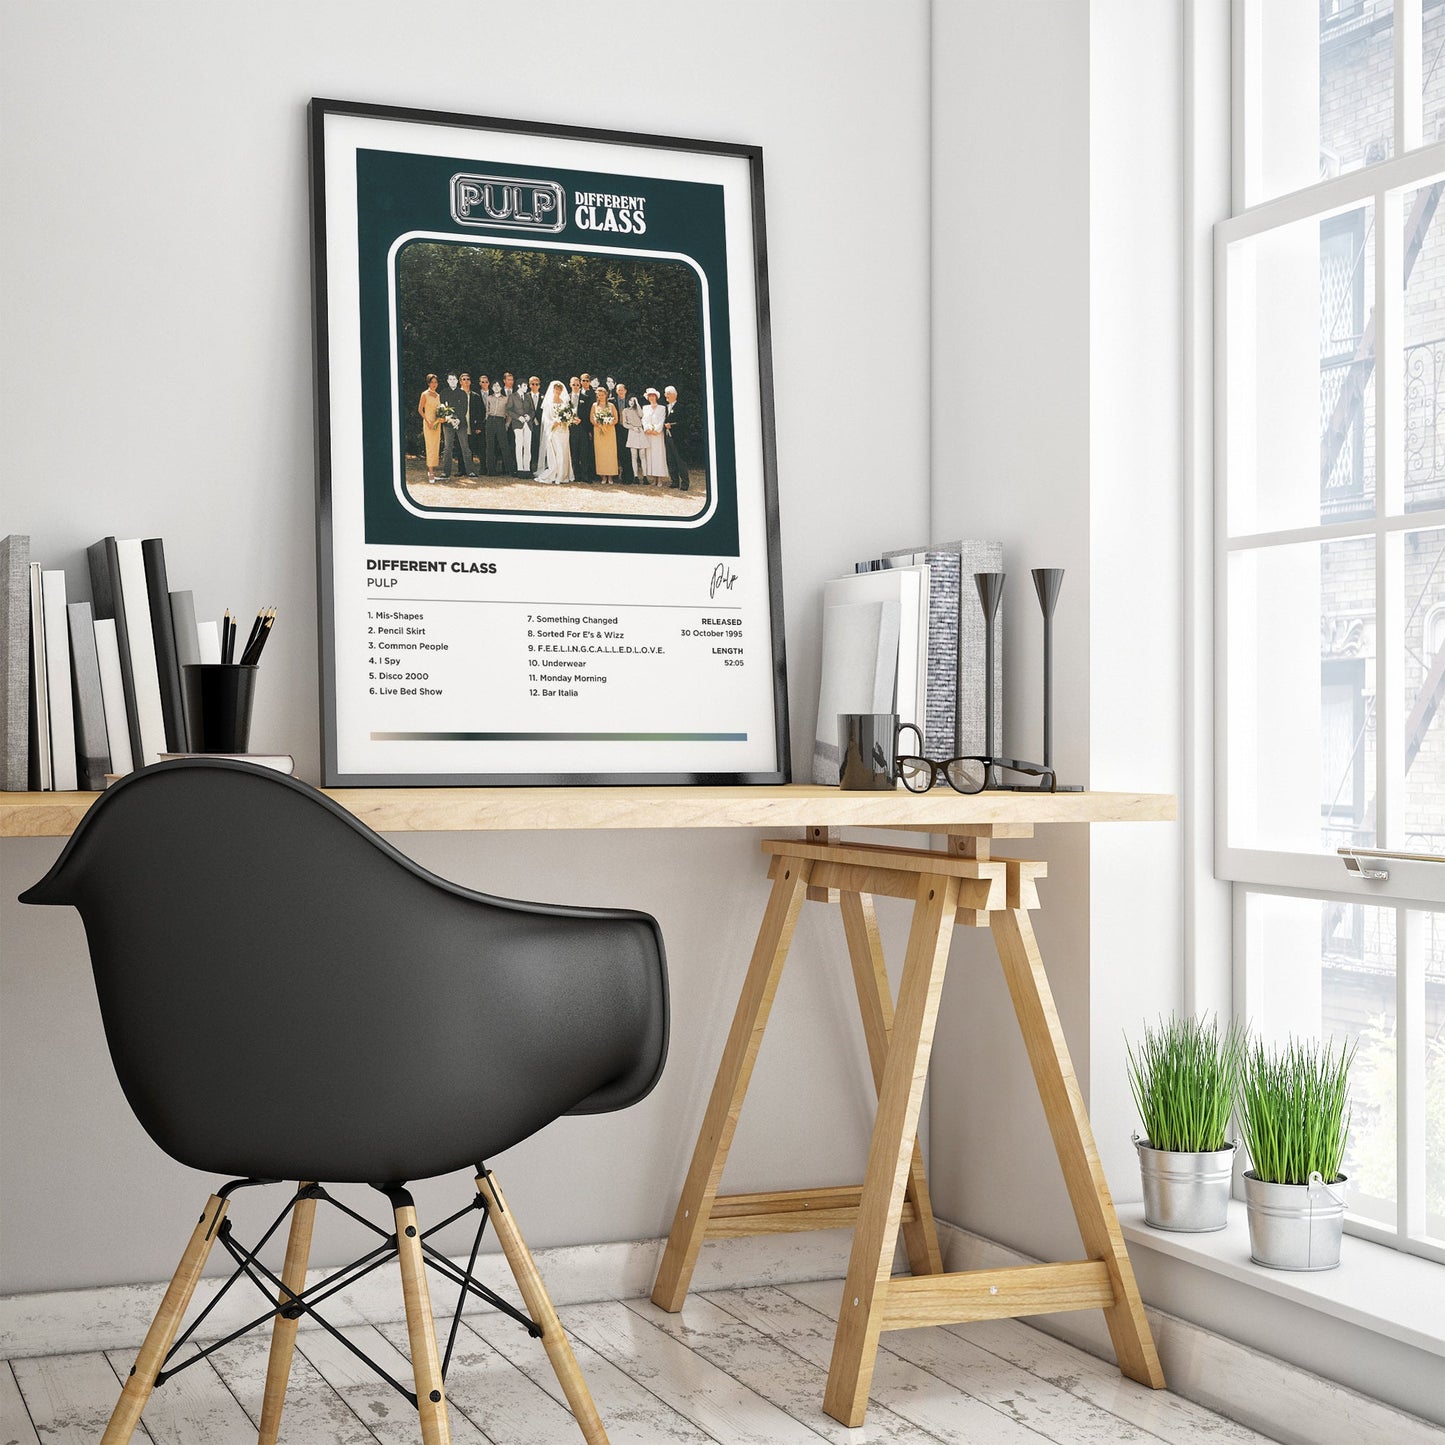 Pulp - Different Class Framed Poster Print | Polaroid Style | Album Cover Artwork